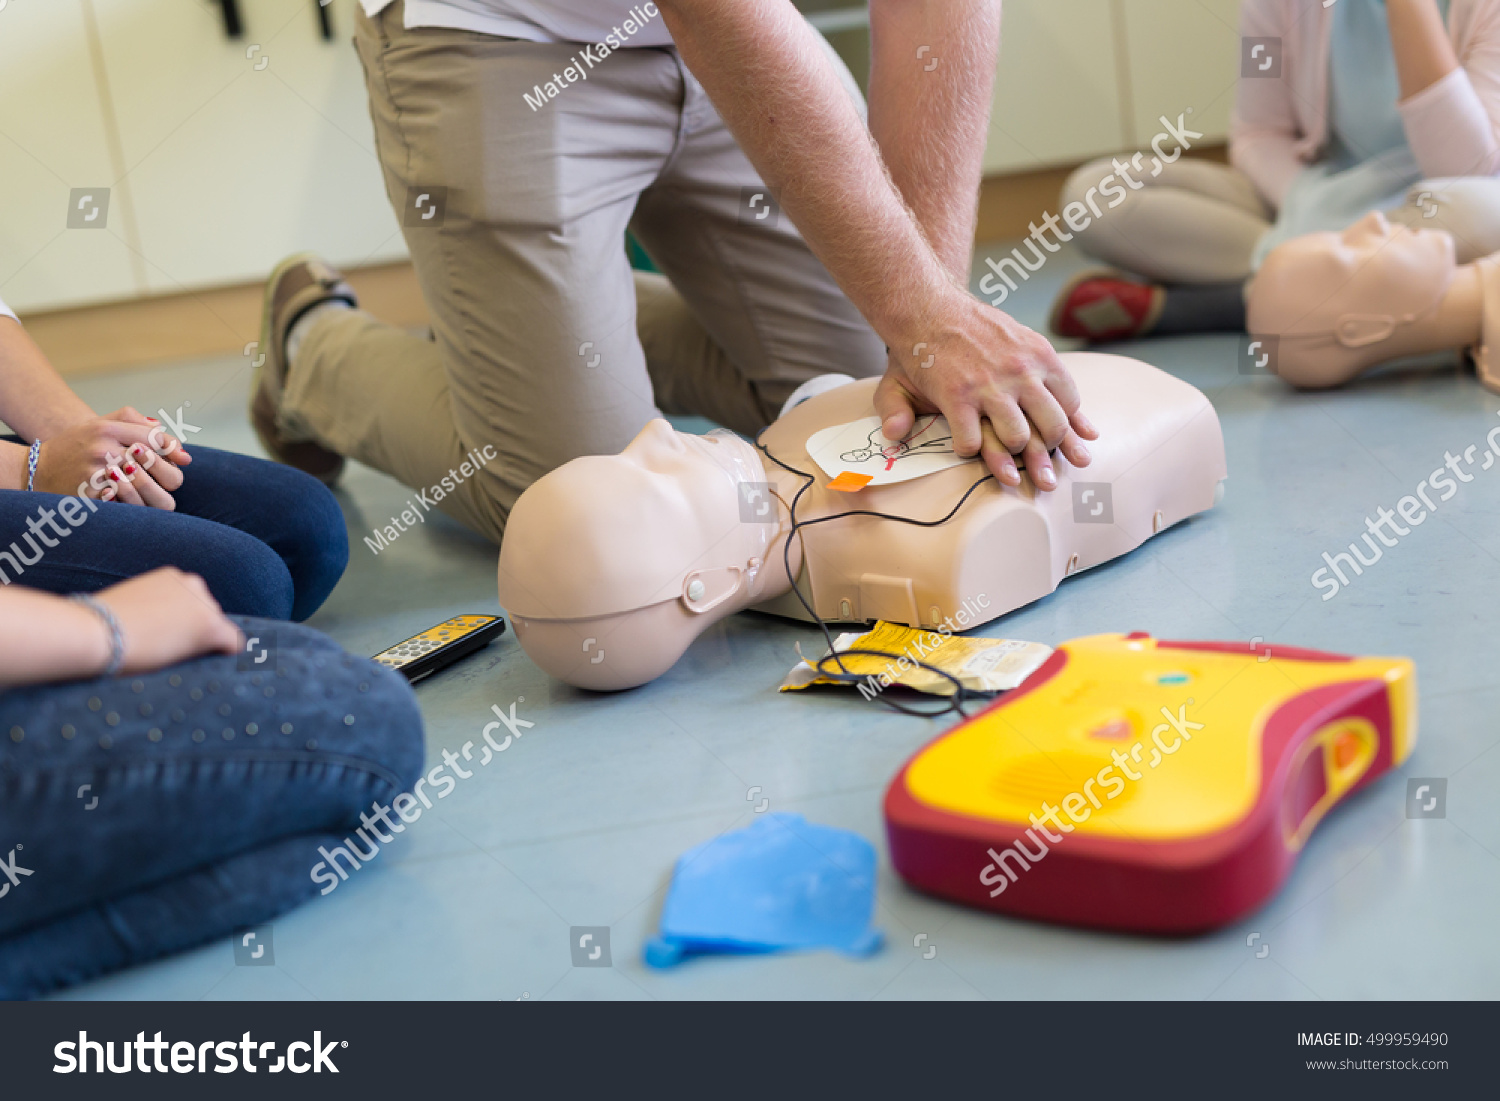 First aid cardiopulmonary resuscitation course using automated external defibrillator device, AED. #499959490